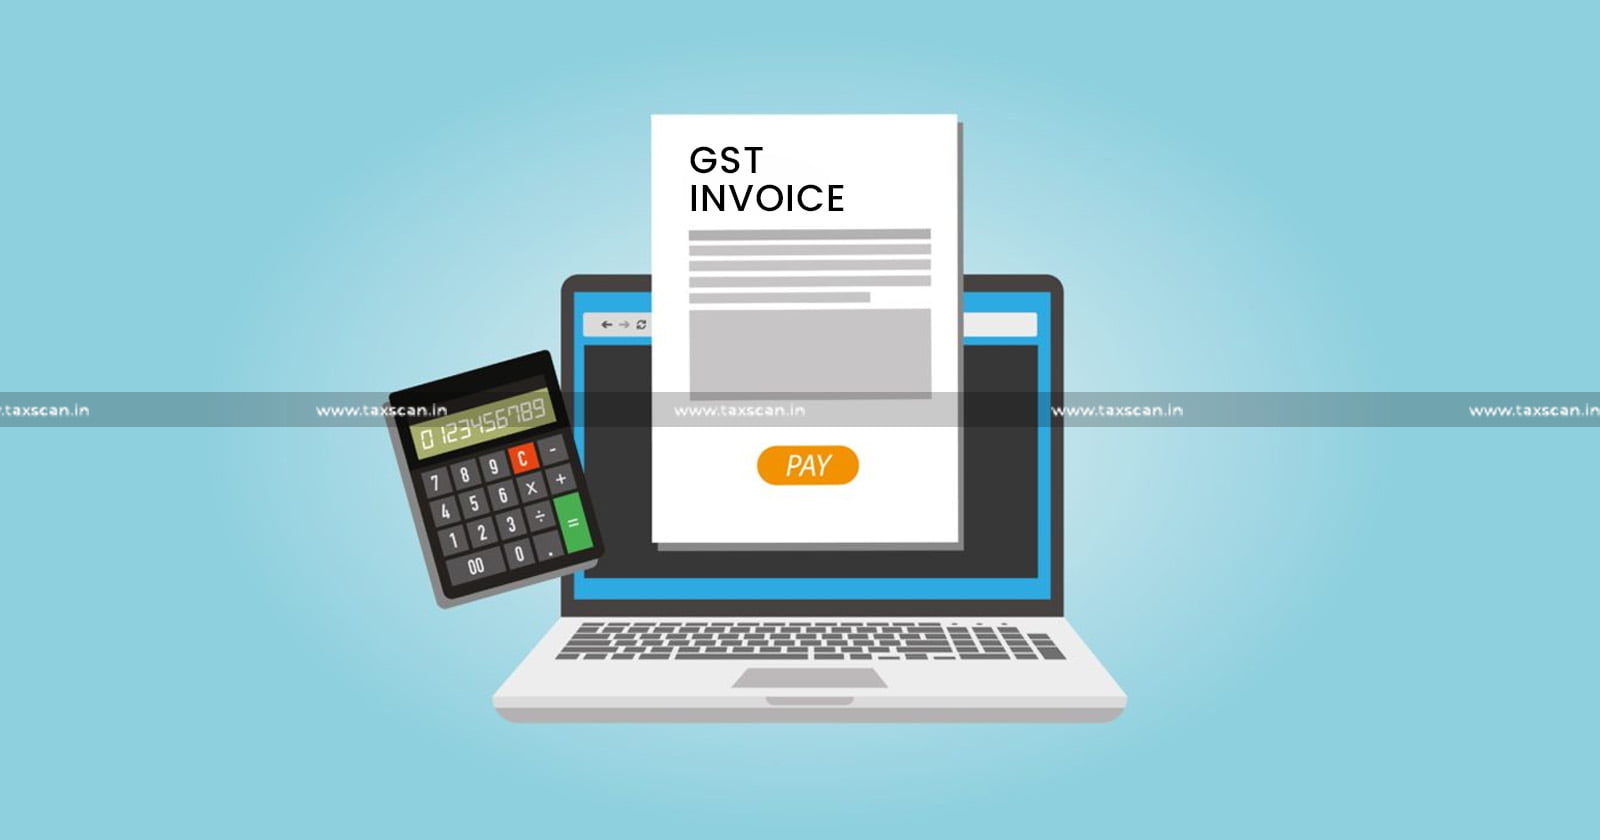 Gujarat High Court - GST - GST Invoices - Issuance of GST - taxscan